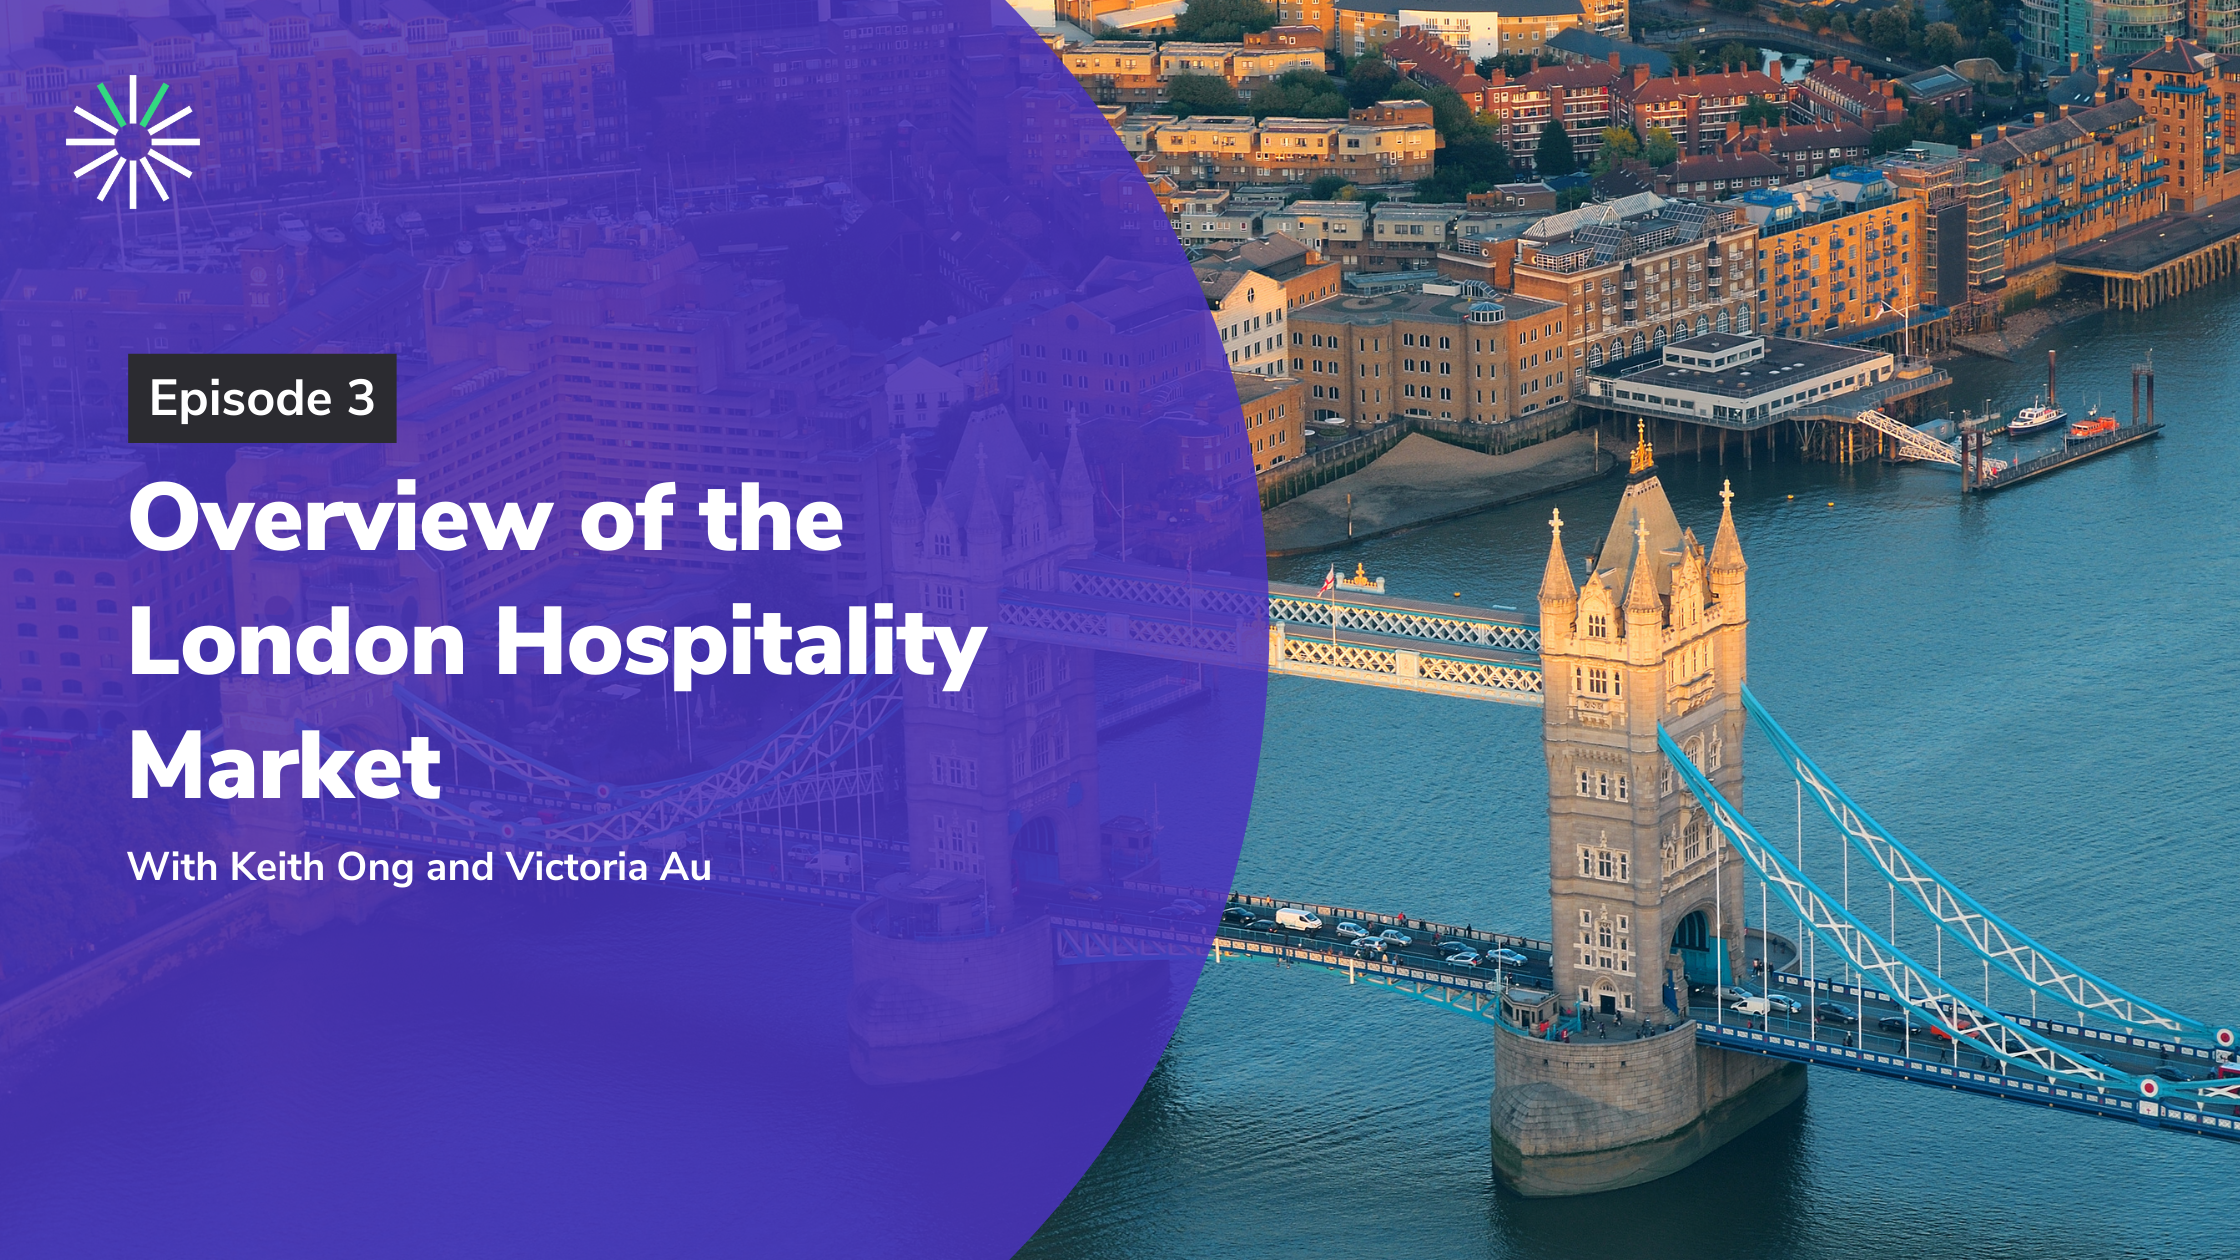 Episode 3: Overview of the London Hospitality Market